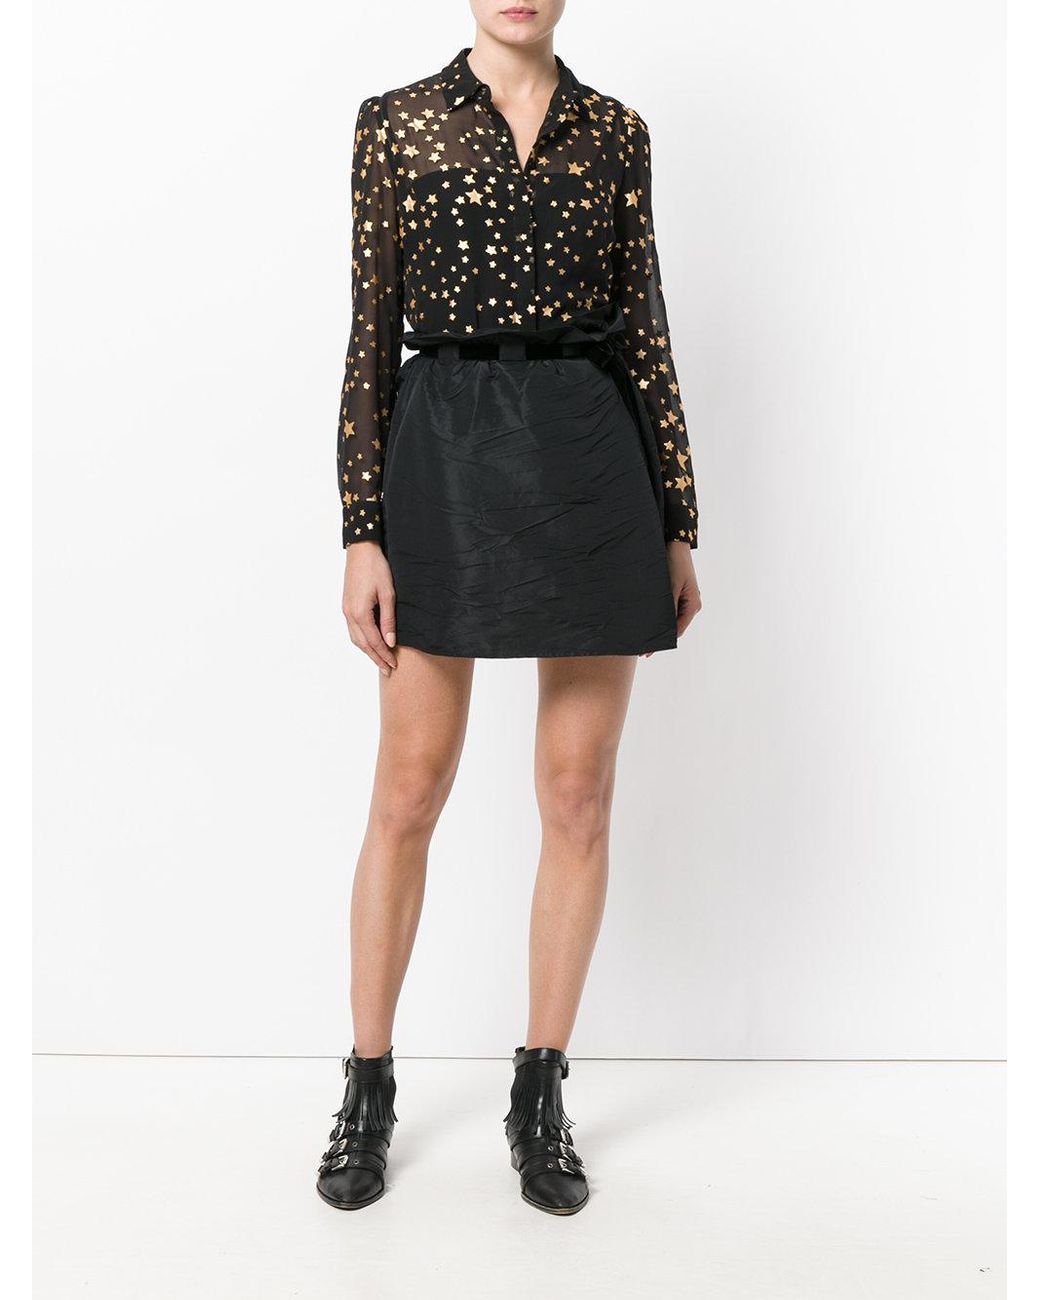 RED Valentino Layered Sheer Gold Foil Star Shirt in Black